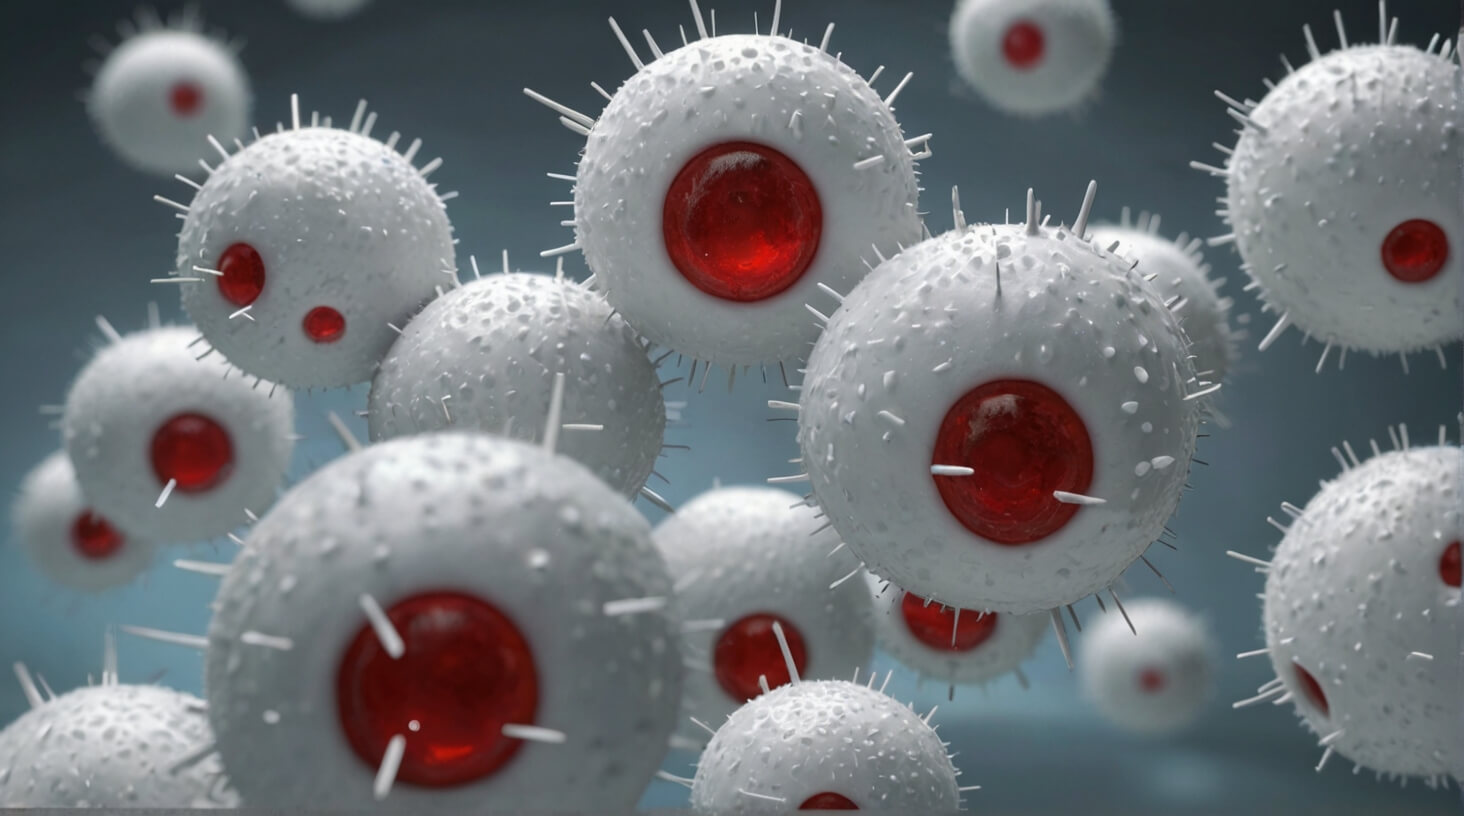 Image showing the process of white blood cell production in a human body.